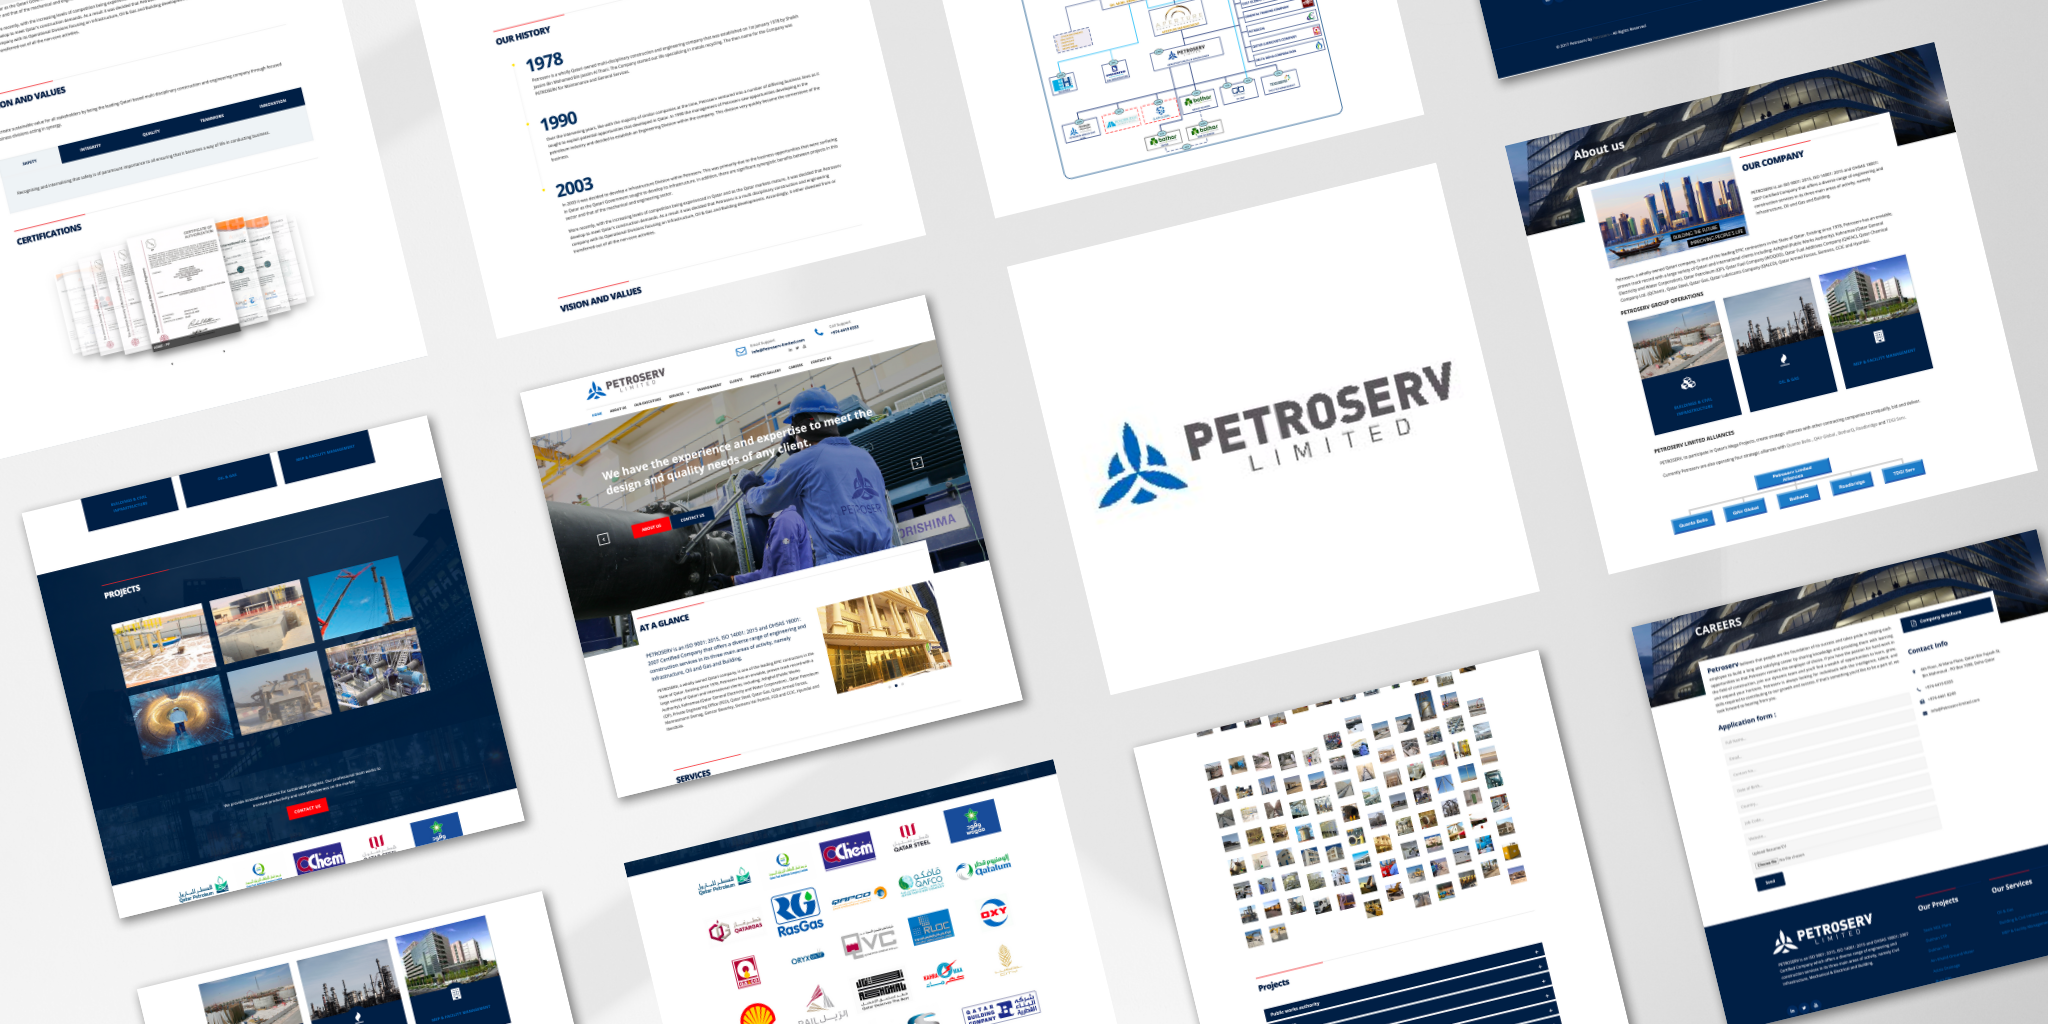 Digital Transformation: Enhancing Petroserv's Online Presence and User Experience